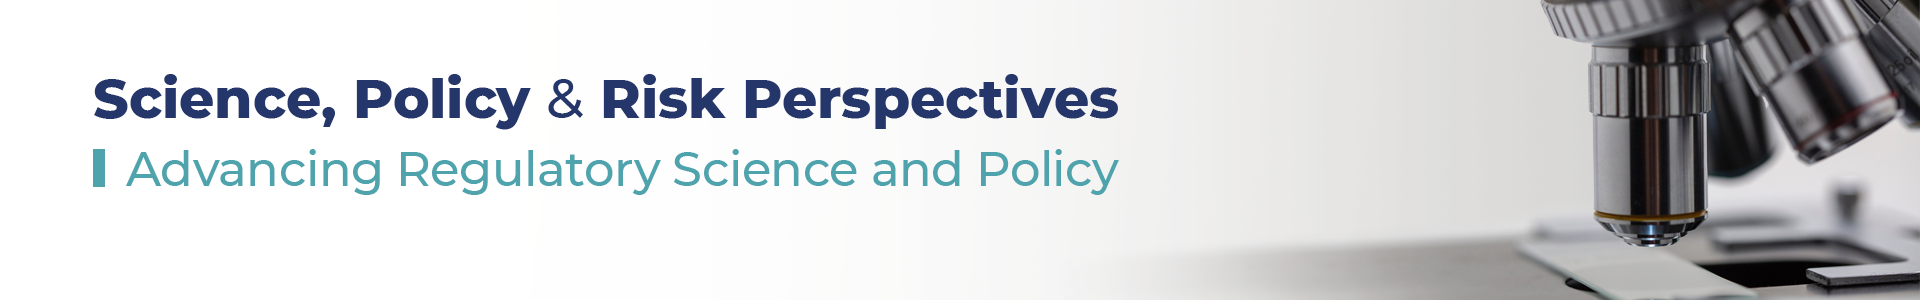 Science, Policy, & Risk Perspectives - Advancing regulatory science and policy